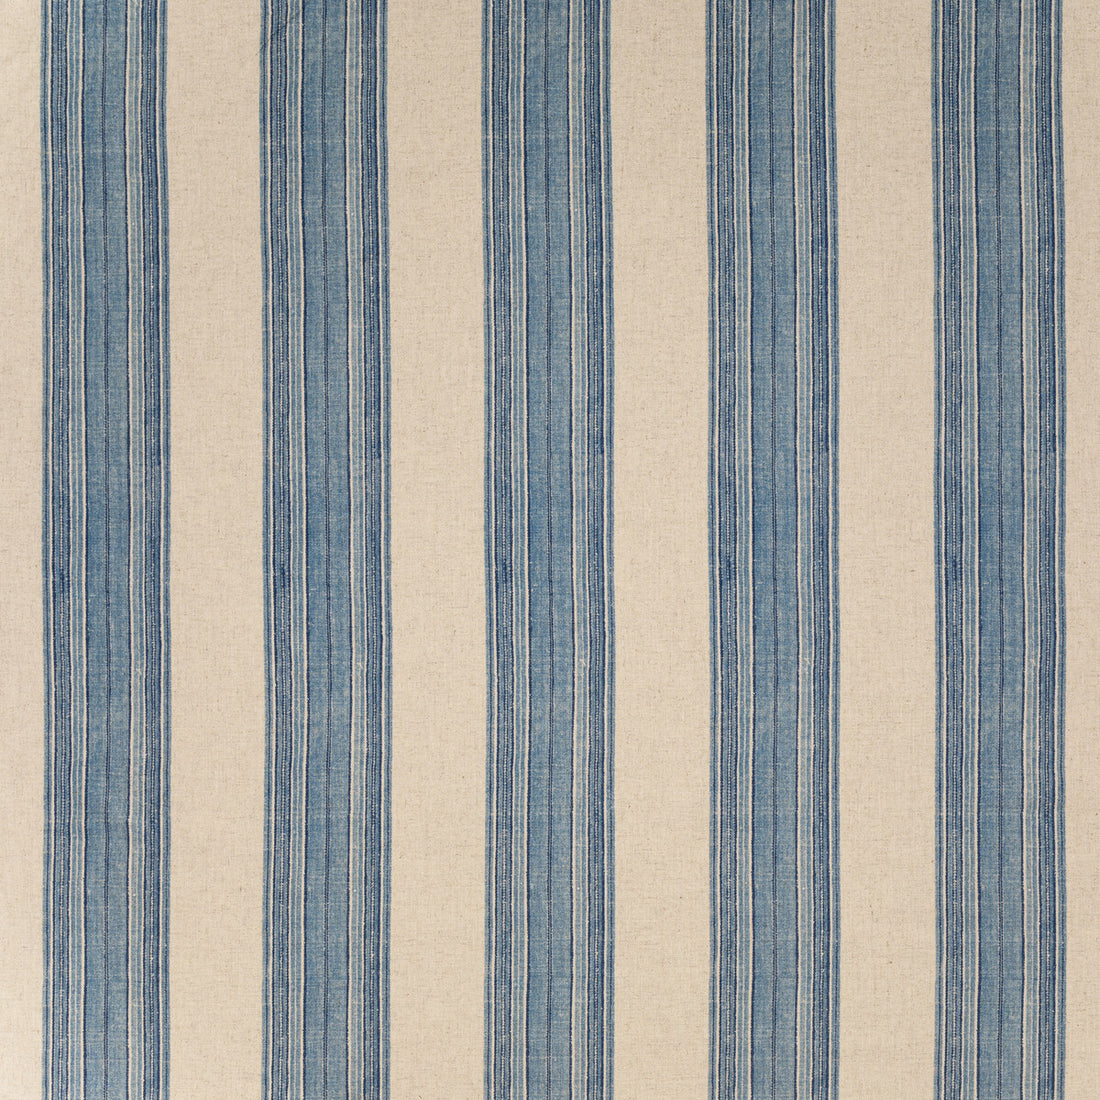 Mifflin Stripe fabric in blue color - pattern BFC-3709.5.0 - by Lee Jofa in the Blithfield Eden collection